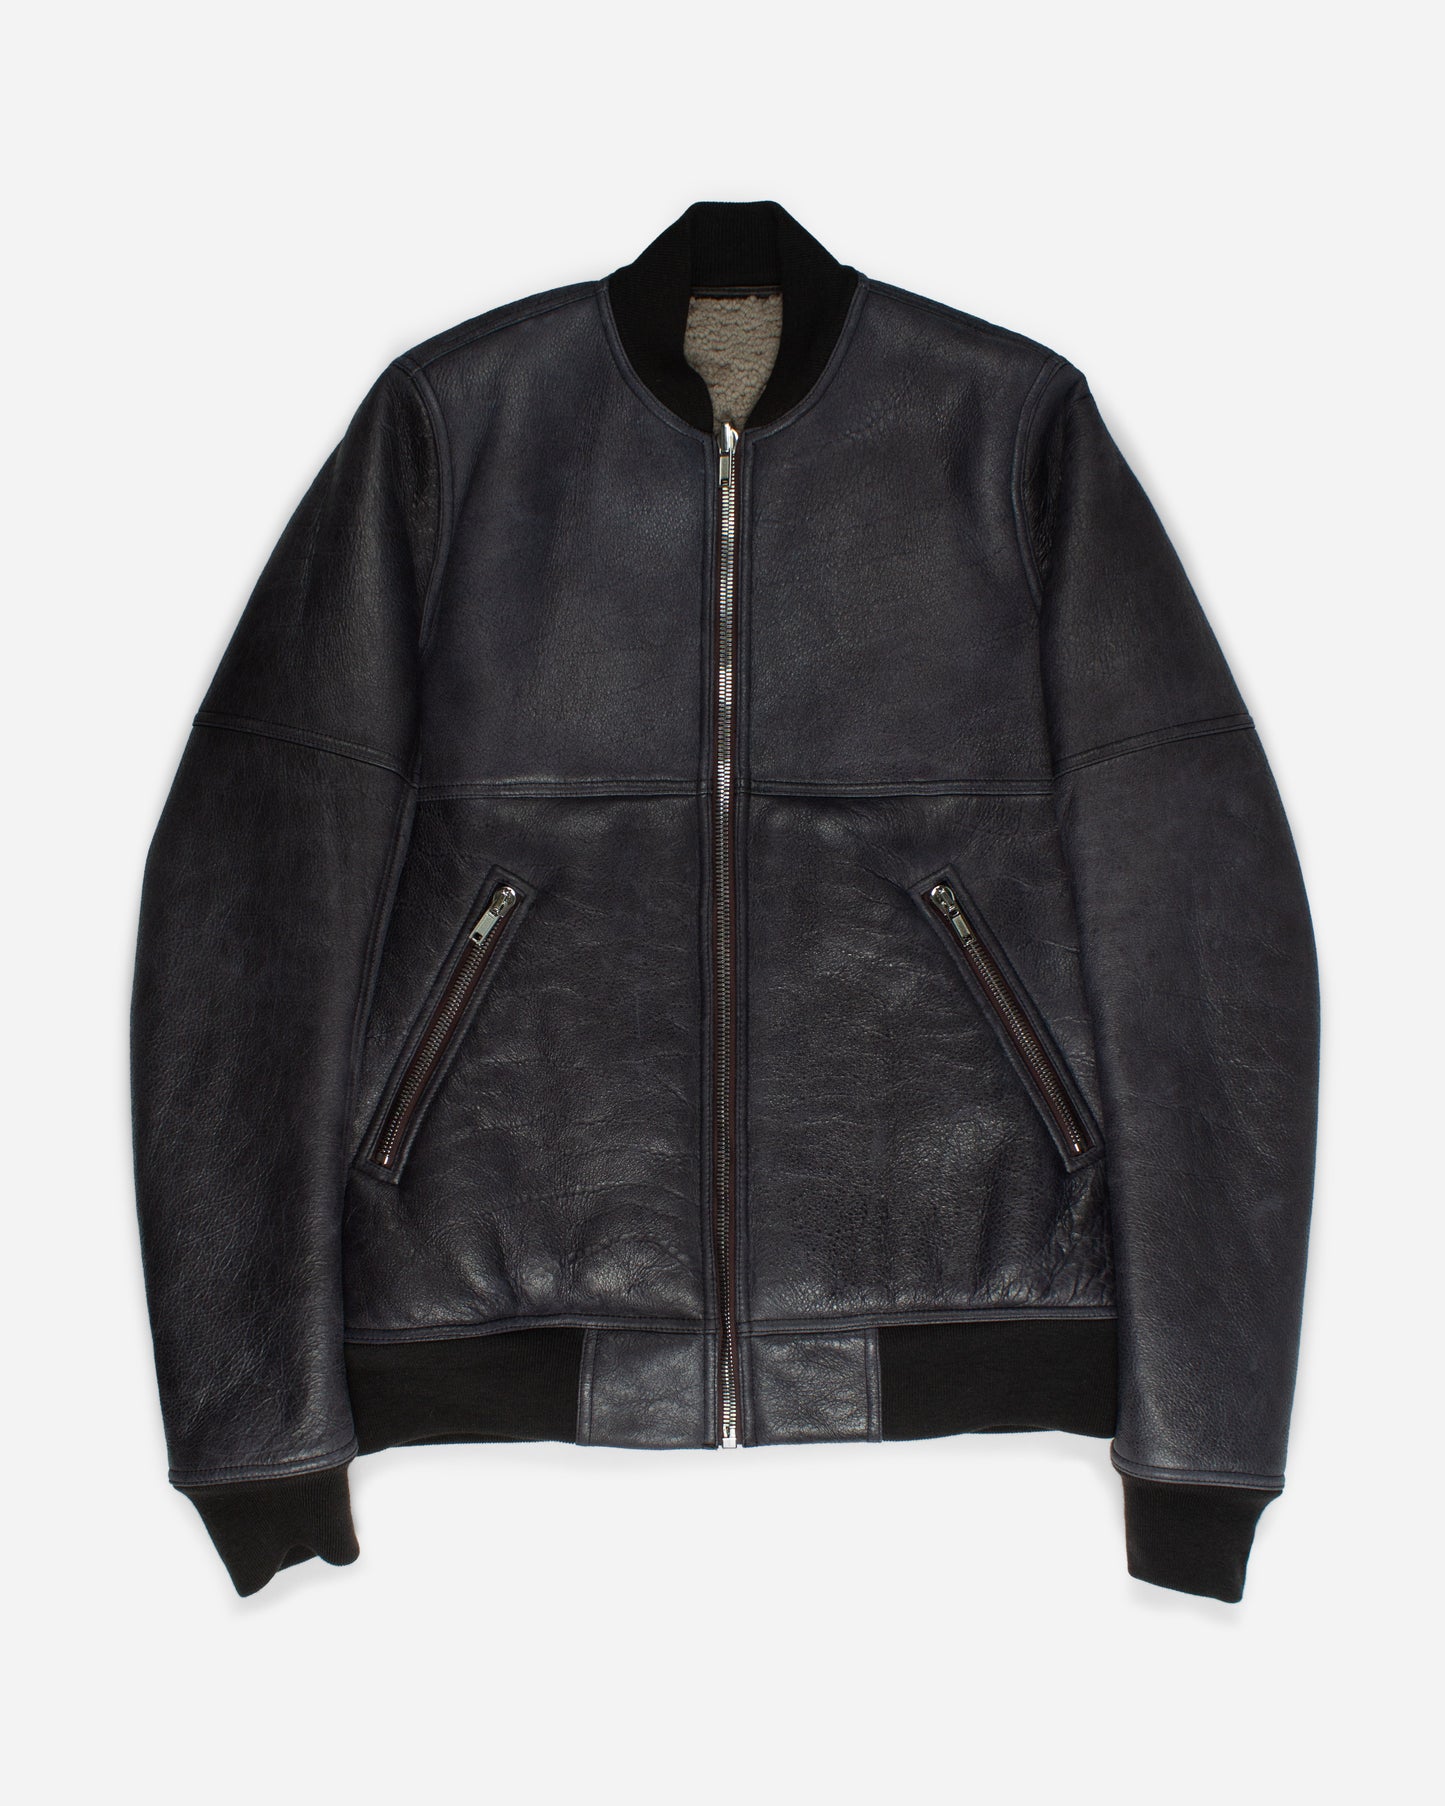 Reversible Sherpa/Leather Jacket (AW20)